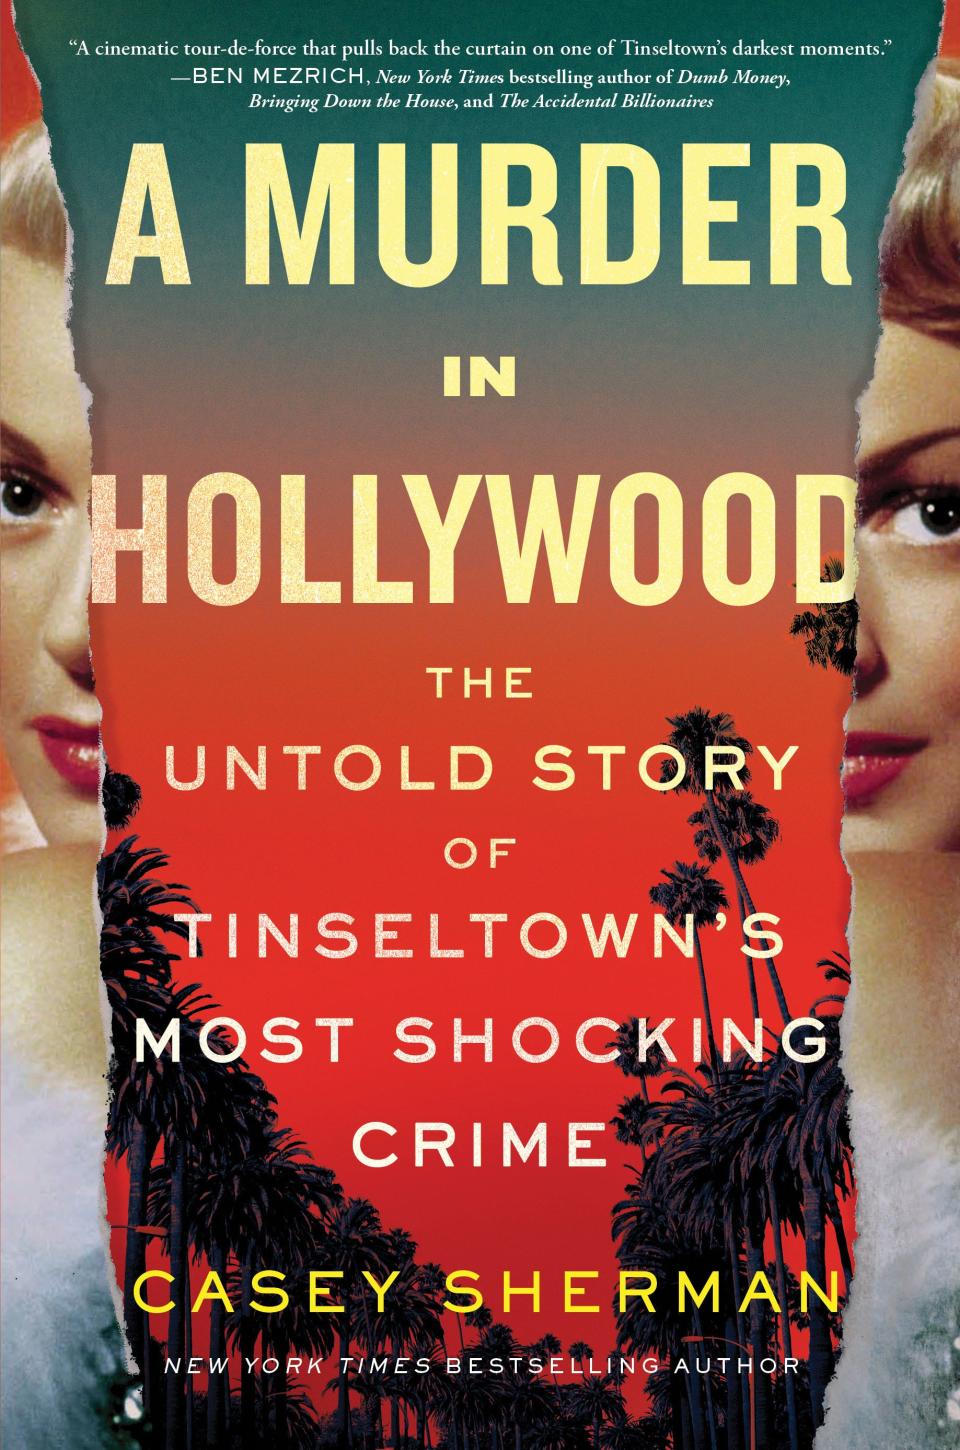 True crime author Casey Sherman, a Cape native, just published his 16th book looking into the stabbing death of gangster Johnny Stompanato who was found in Hollywood screen star Lana Turner's home in 1958. Her teenage daughter, Cheryl Crane, claimed she did it to protect her mother from a vicious beating.